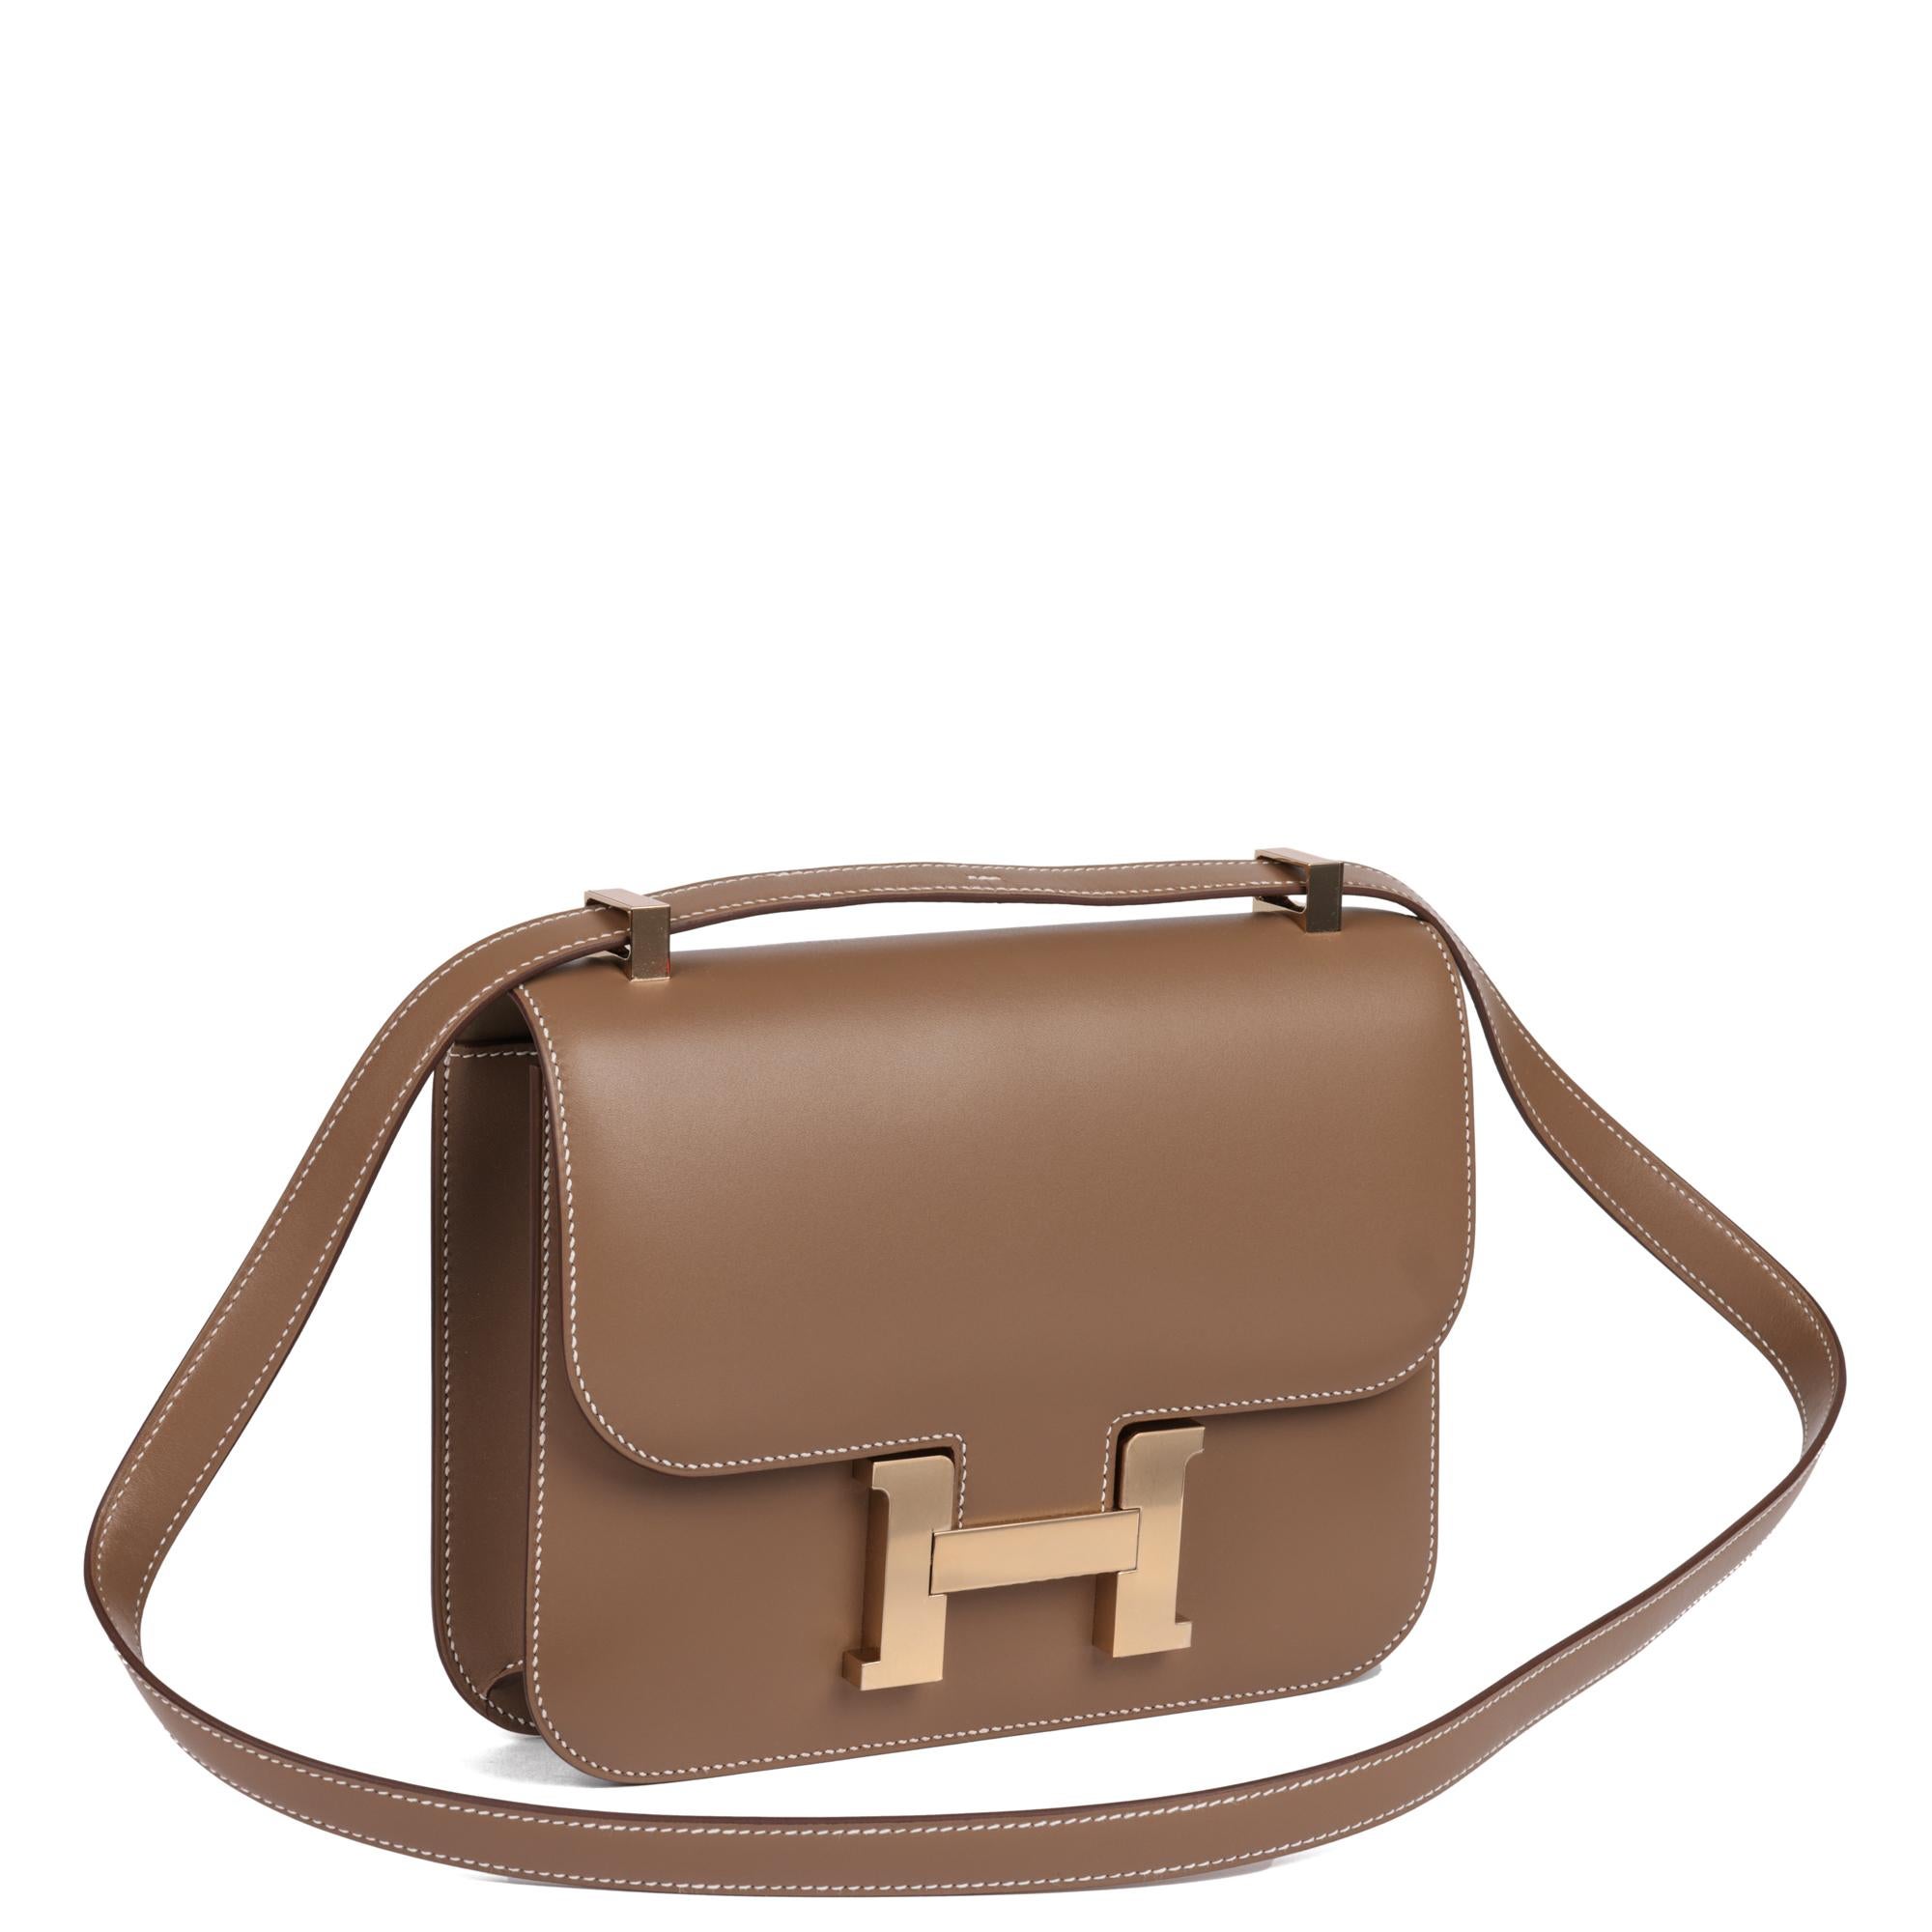 Hermès Etoupe Tadelakt Leather Constance 24

CONDITION NOTES
This item is in unworn condition.

XUPES REFERENCE	HSK020
BRAND	Hermès
MODEL	Constance 24
AGE	2022
GENDER	Women's
MATERIAL(S)	Tadelakt
COLOUR	Taupe
BRAND COLOUR	Etoupe
HARDWARE	Champagne